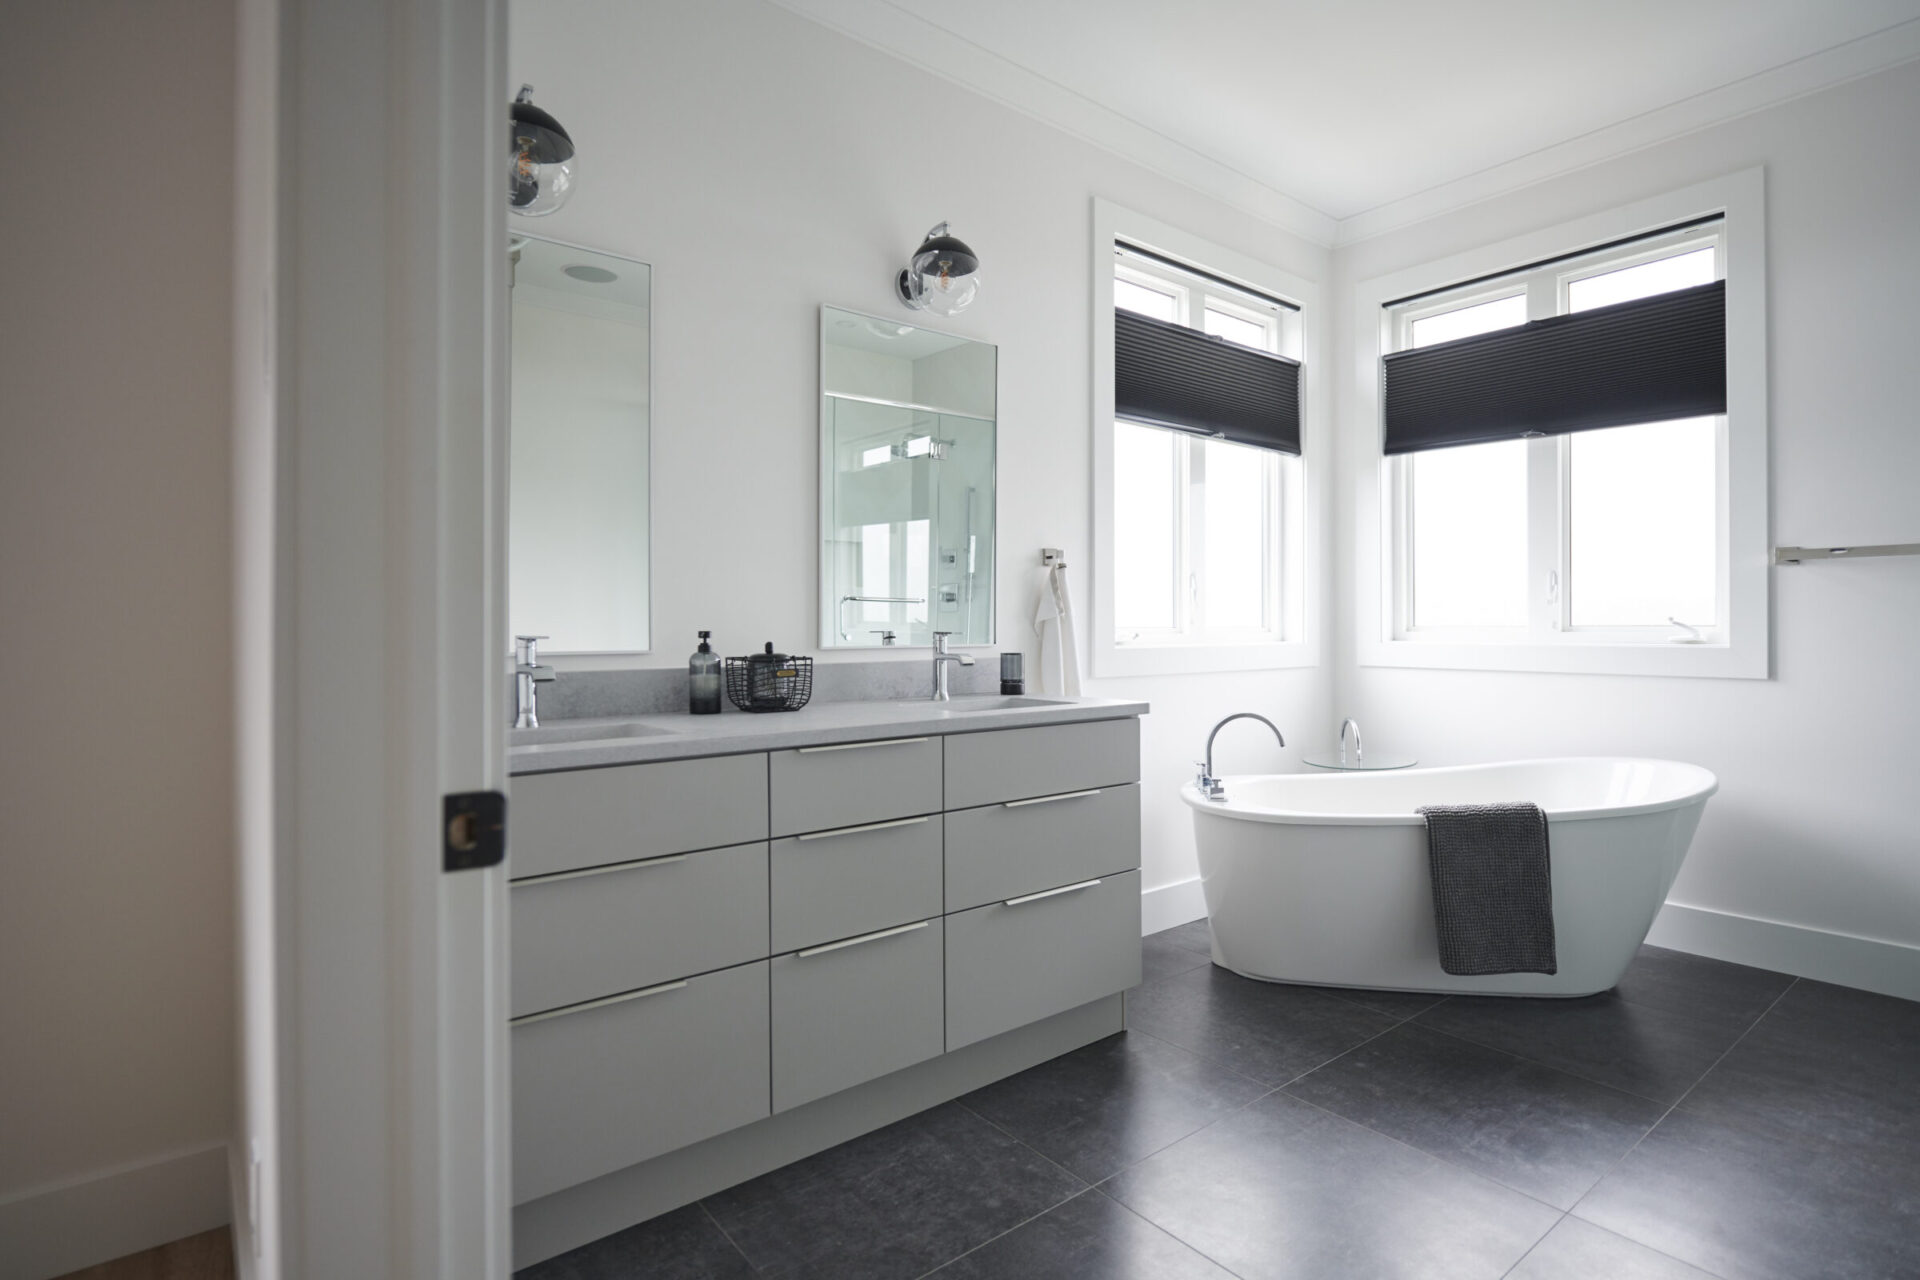 This is a modern bathroom featuring a gray vanity with sink, a large mirror, a freestanding bathtub, dark tiled flooring, and blinds on the windows.